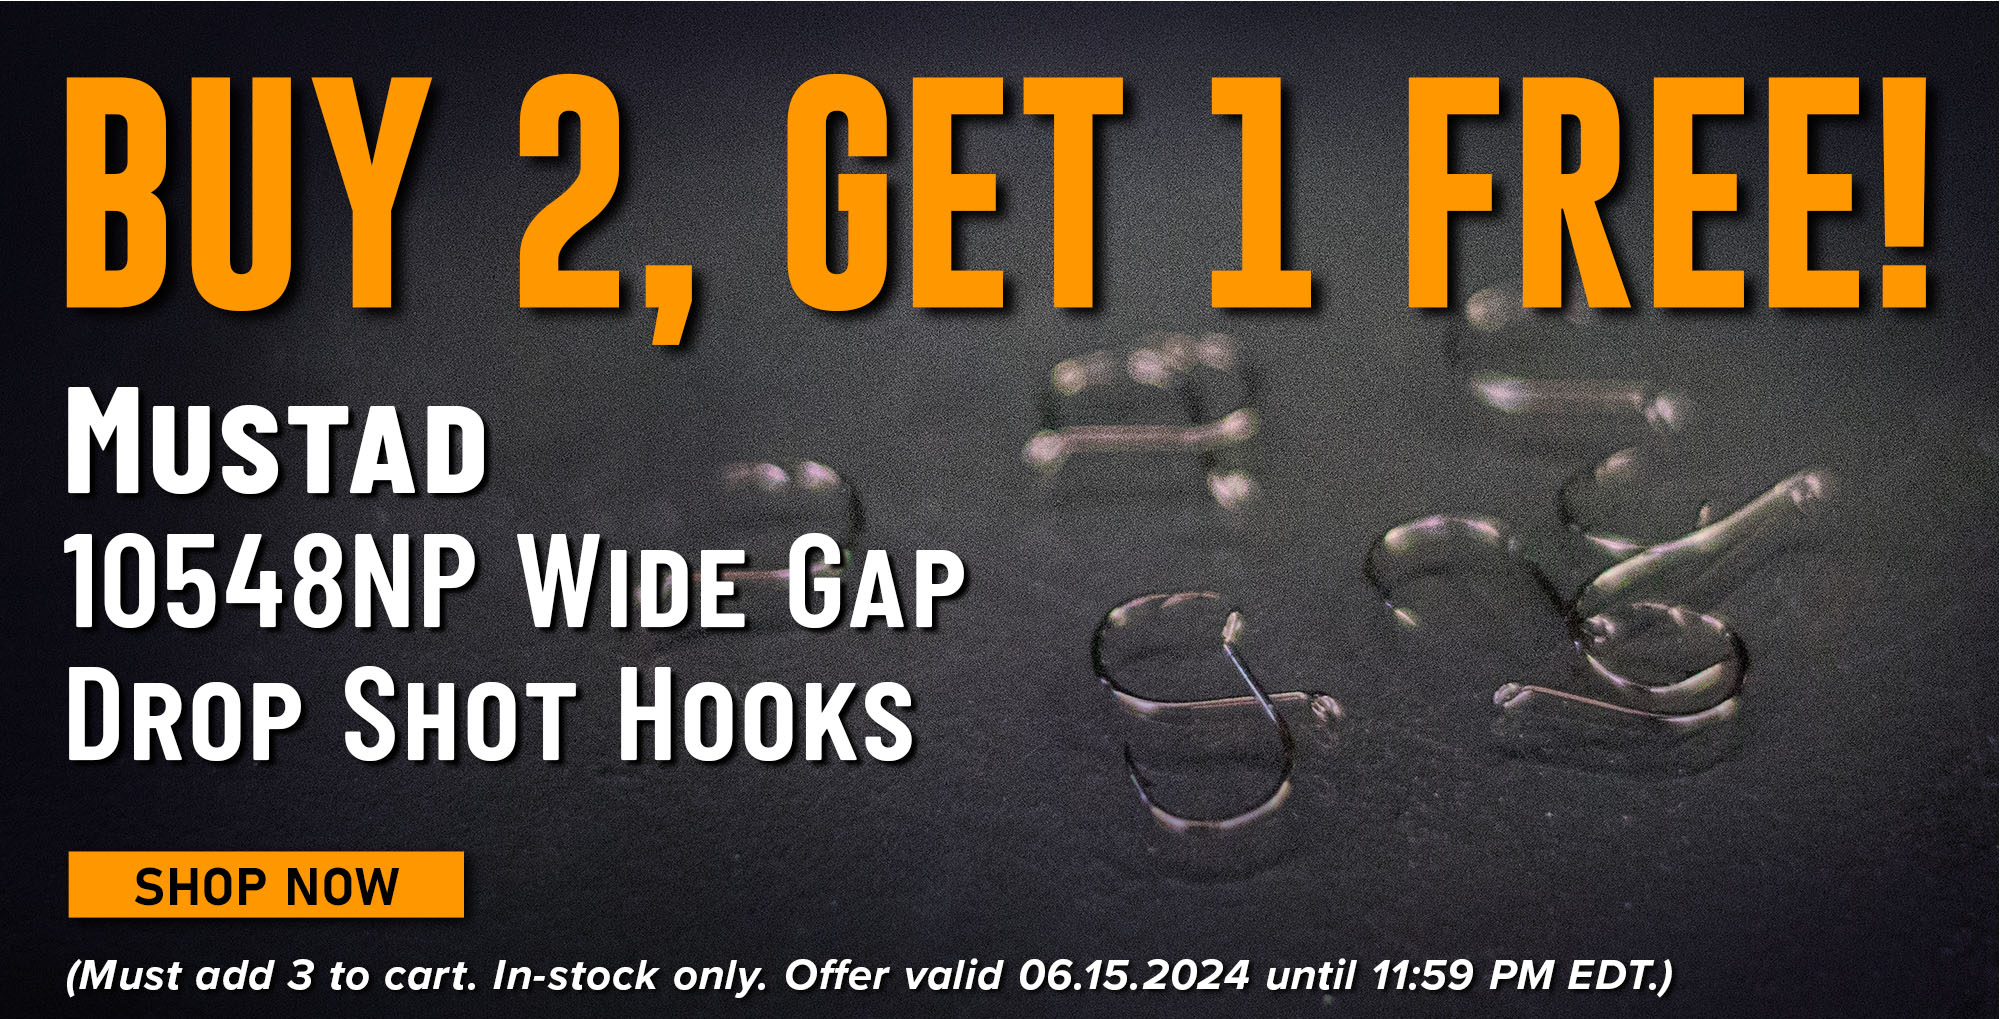 Buy 2, Get 1 Free! Mustad 10548NP Wide Gap Drop Shot Hooks Shop Now (Must add 3 to cart. In-stock only. Offer valid 06.15.2024 until 11:59 PM EDT.)